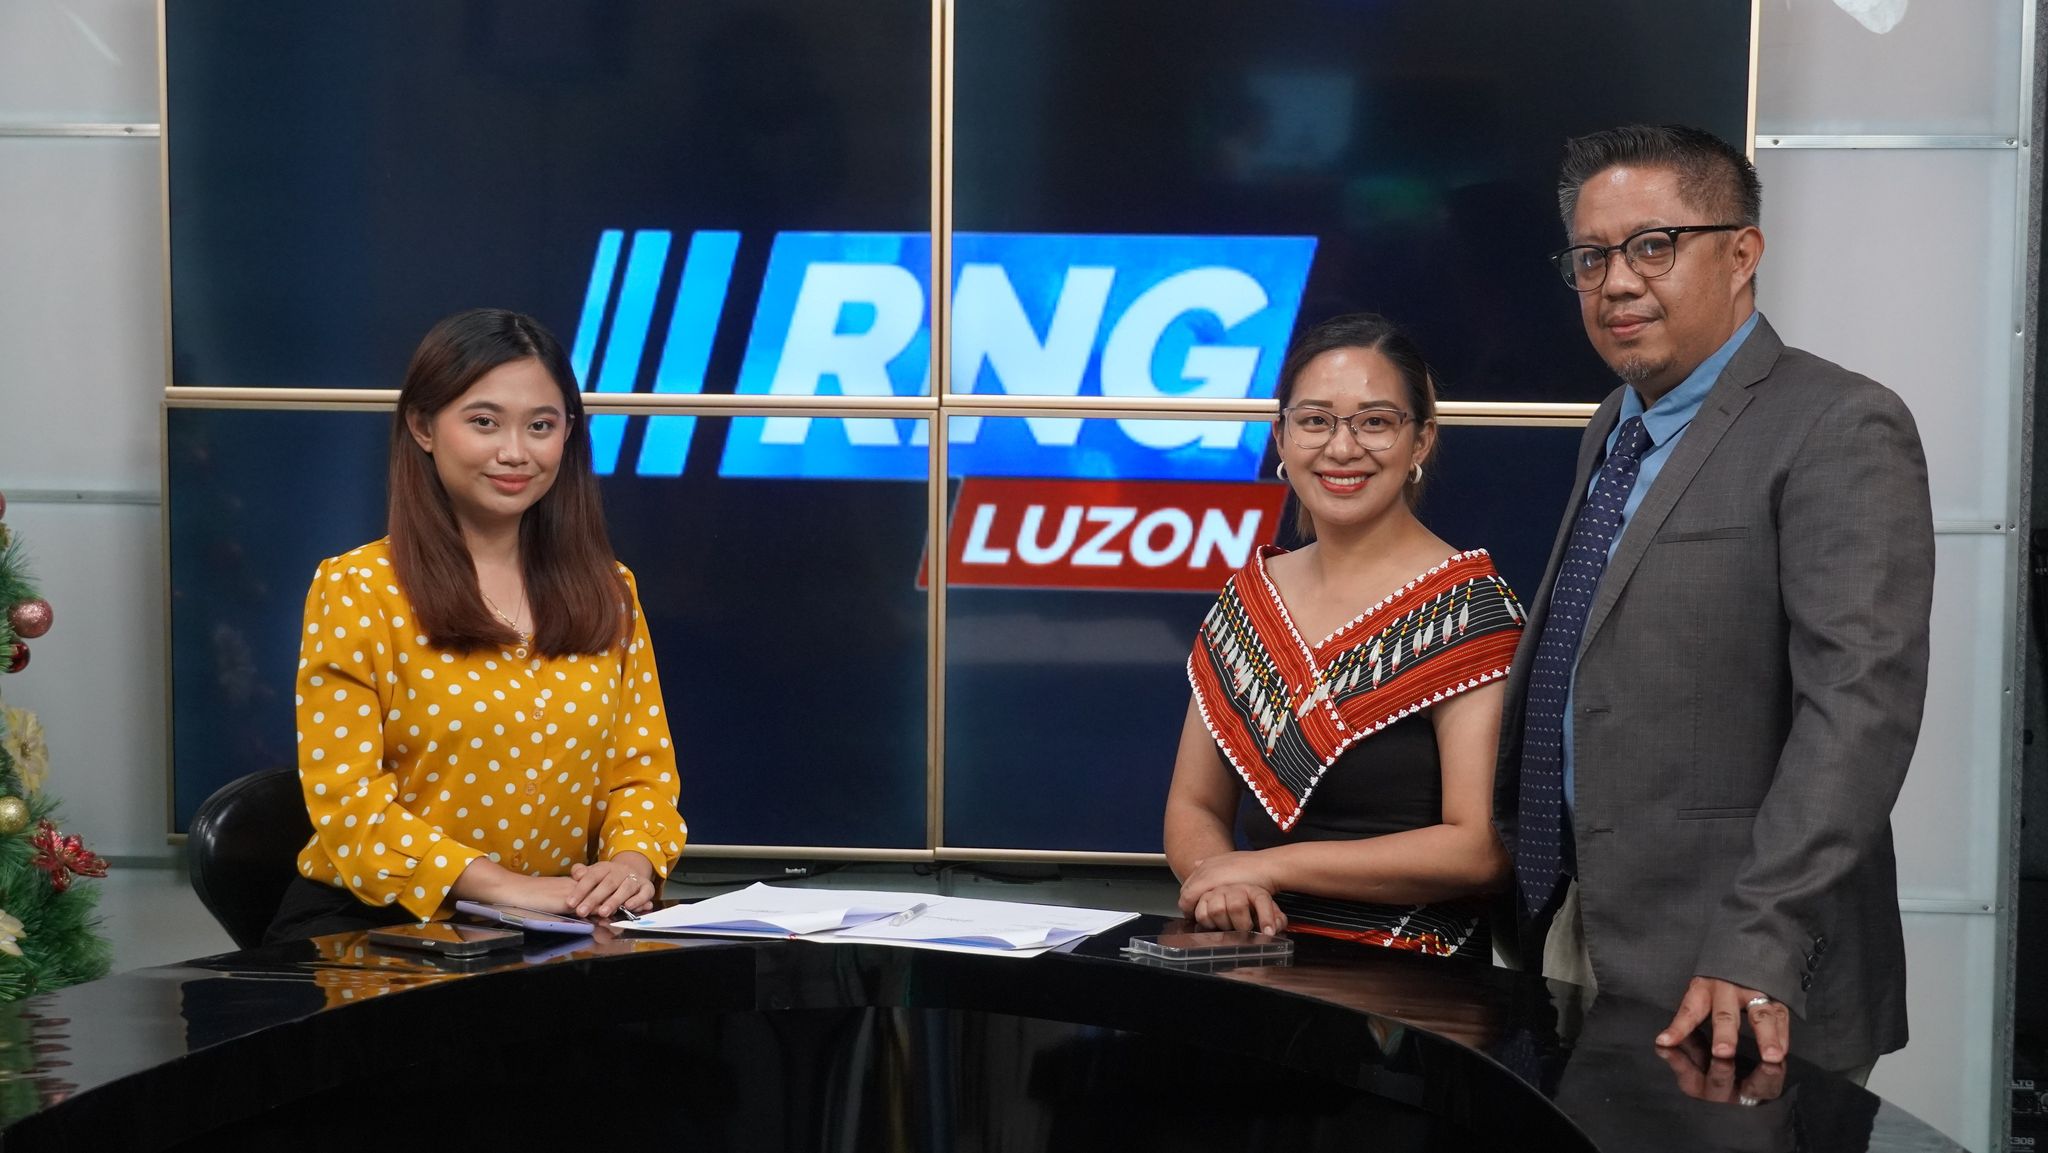 REGIONAL NEWS GROUP (RNG) LUZON welcomes two new shows “CheckPoint” and “IfonTalk” hosted by Gary Paul Lumbag Abela and Grayzel C. Yog-a.